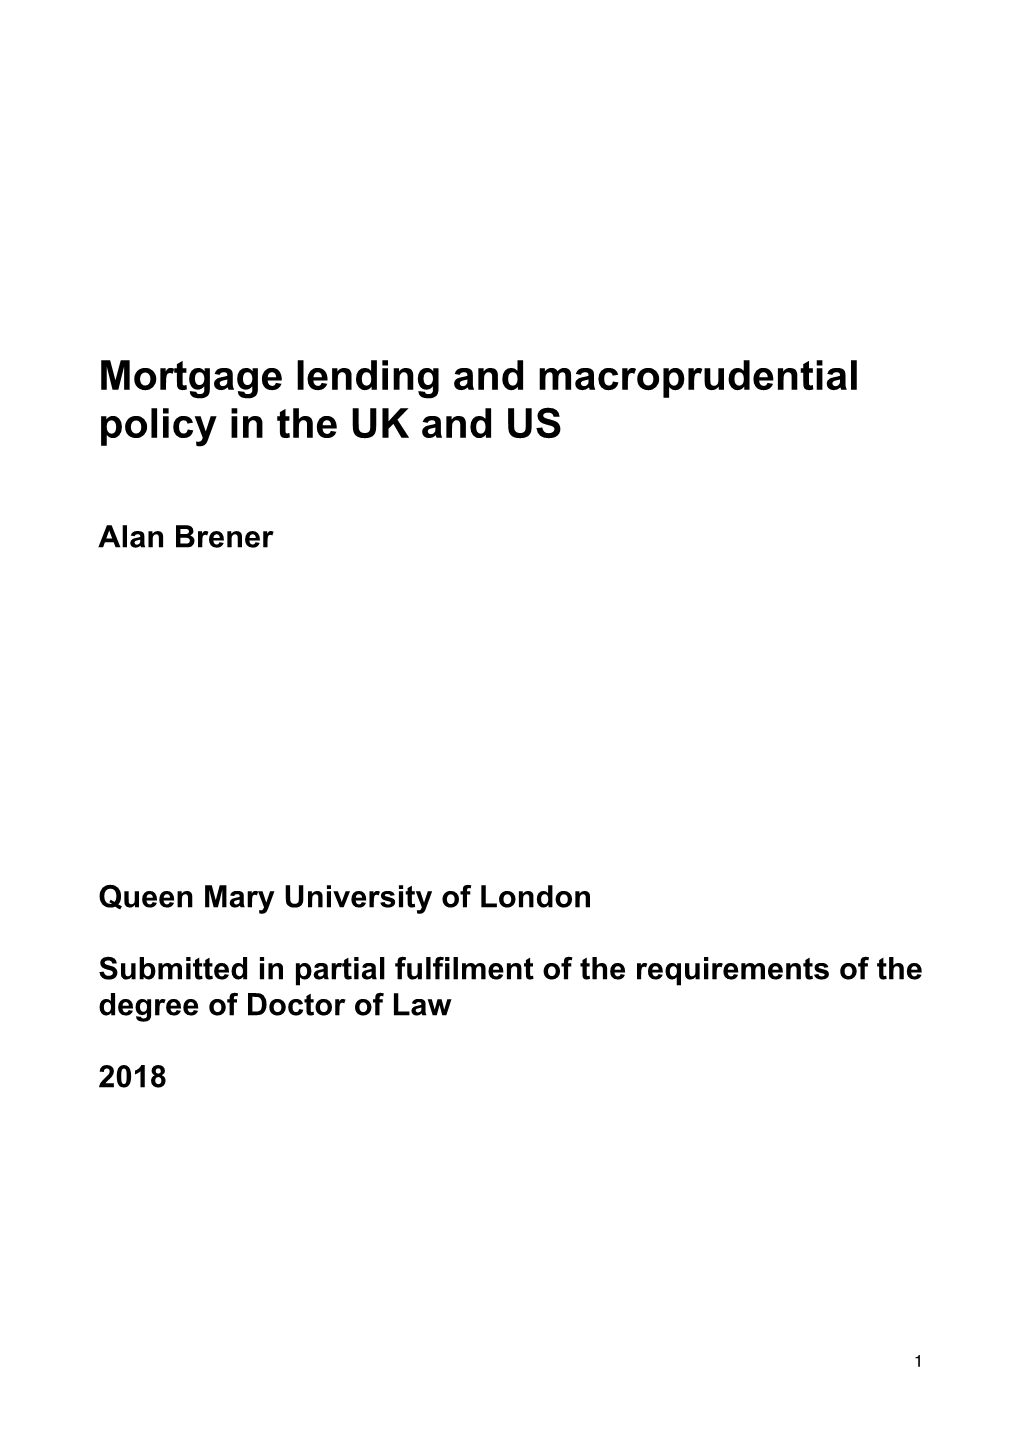 Mortgage Lending and Macroprudential Policy in the UK and US